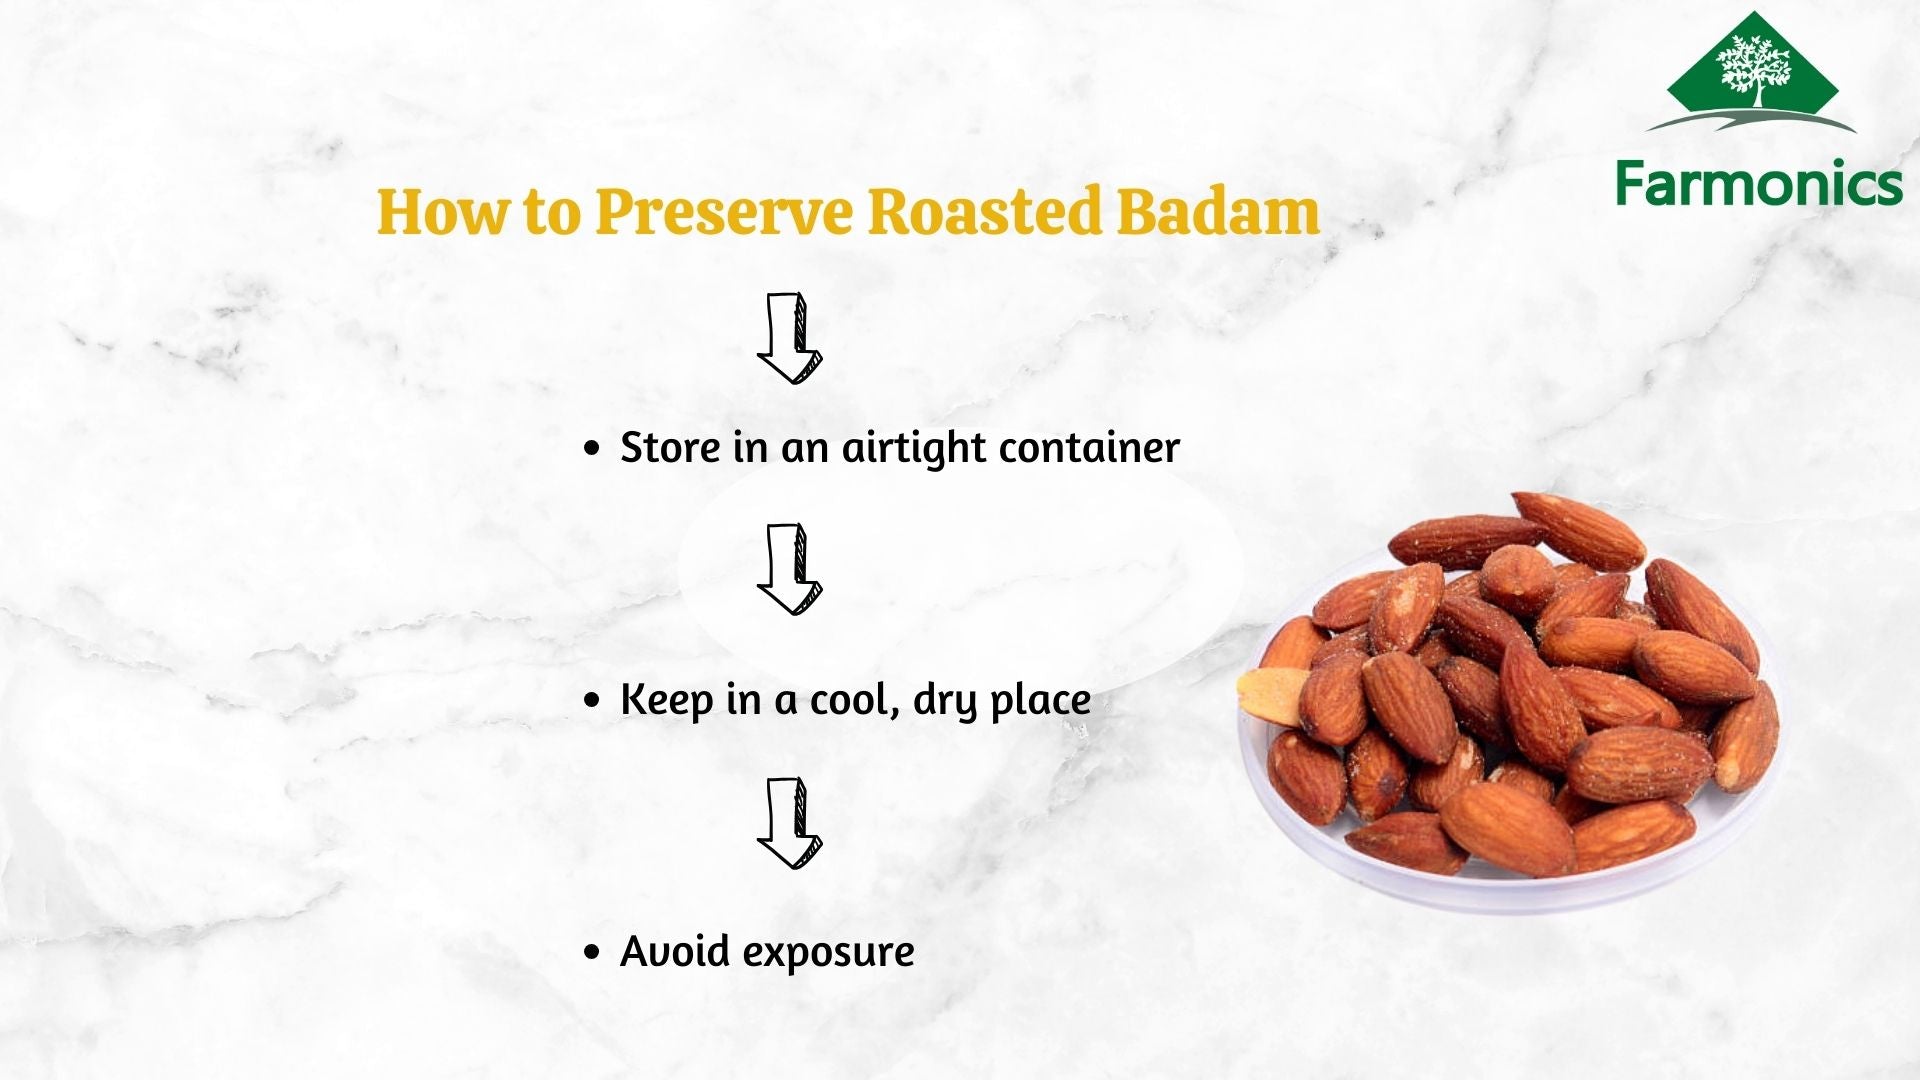  Ways in which you can preserve premium quality Farmonics Roasted almonds/Roasted Badam